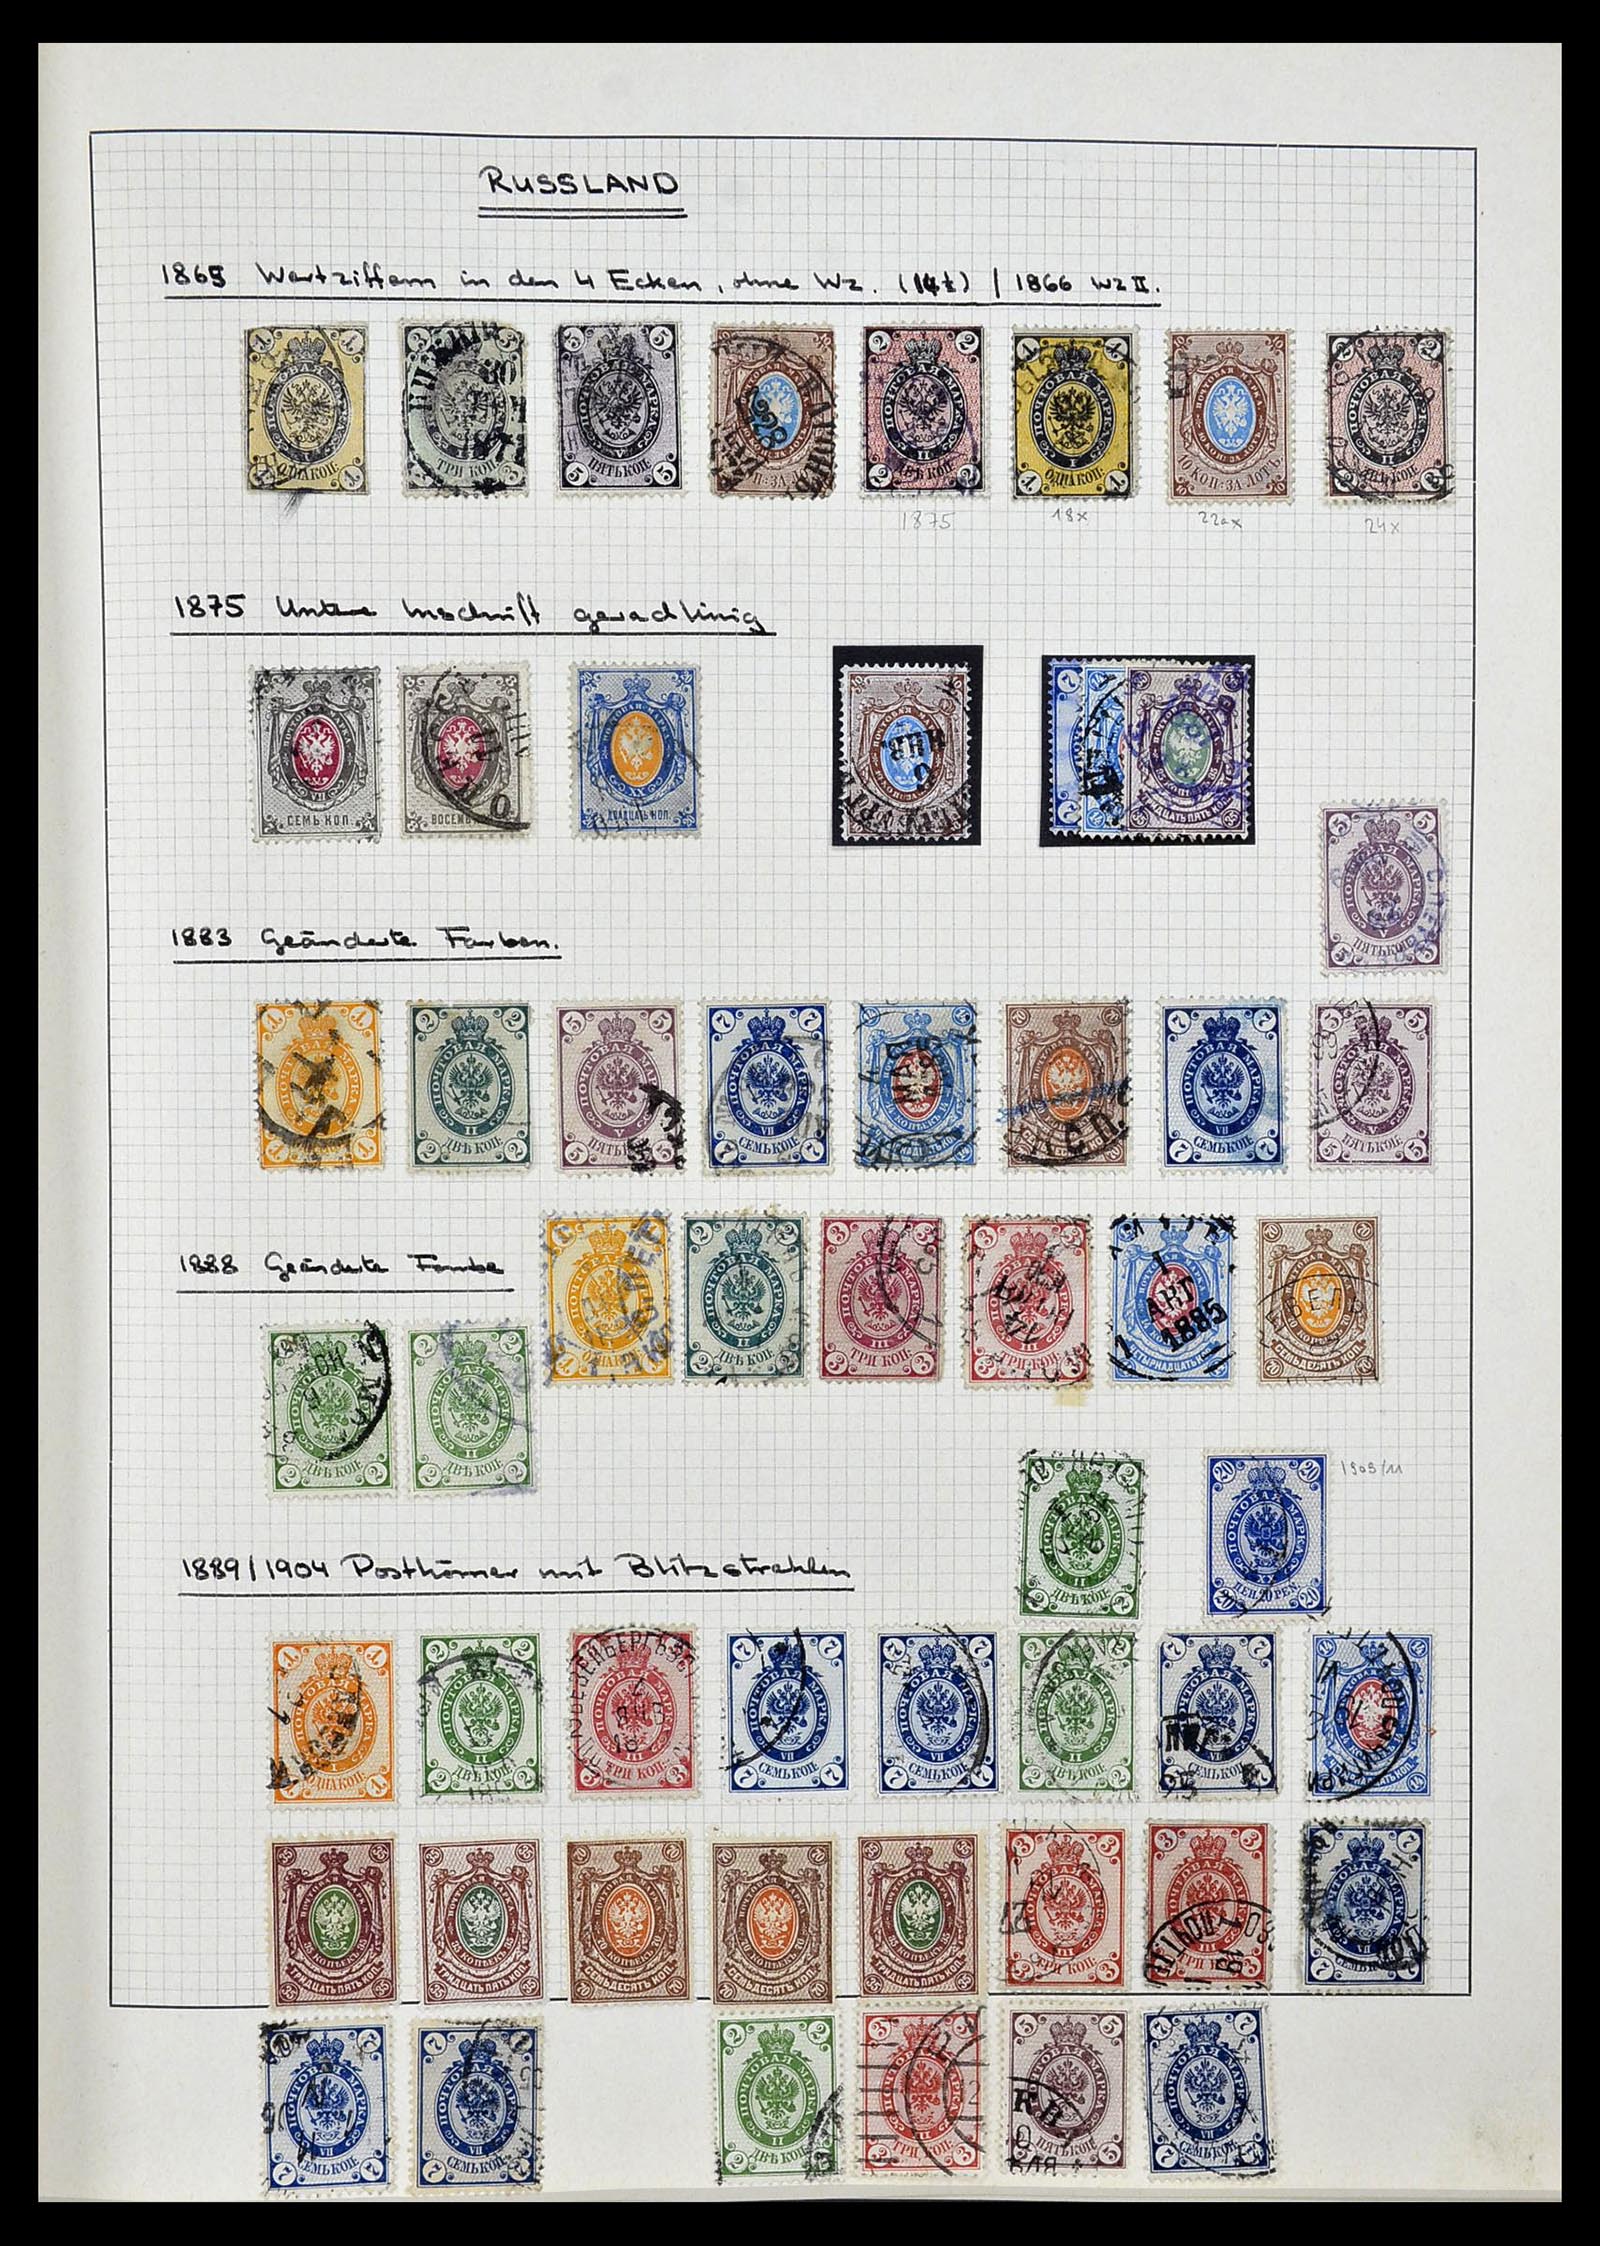 34251 001 - Stamp collection 34251 Russia 1865-1966.